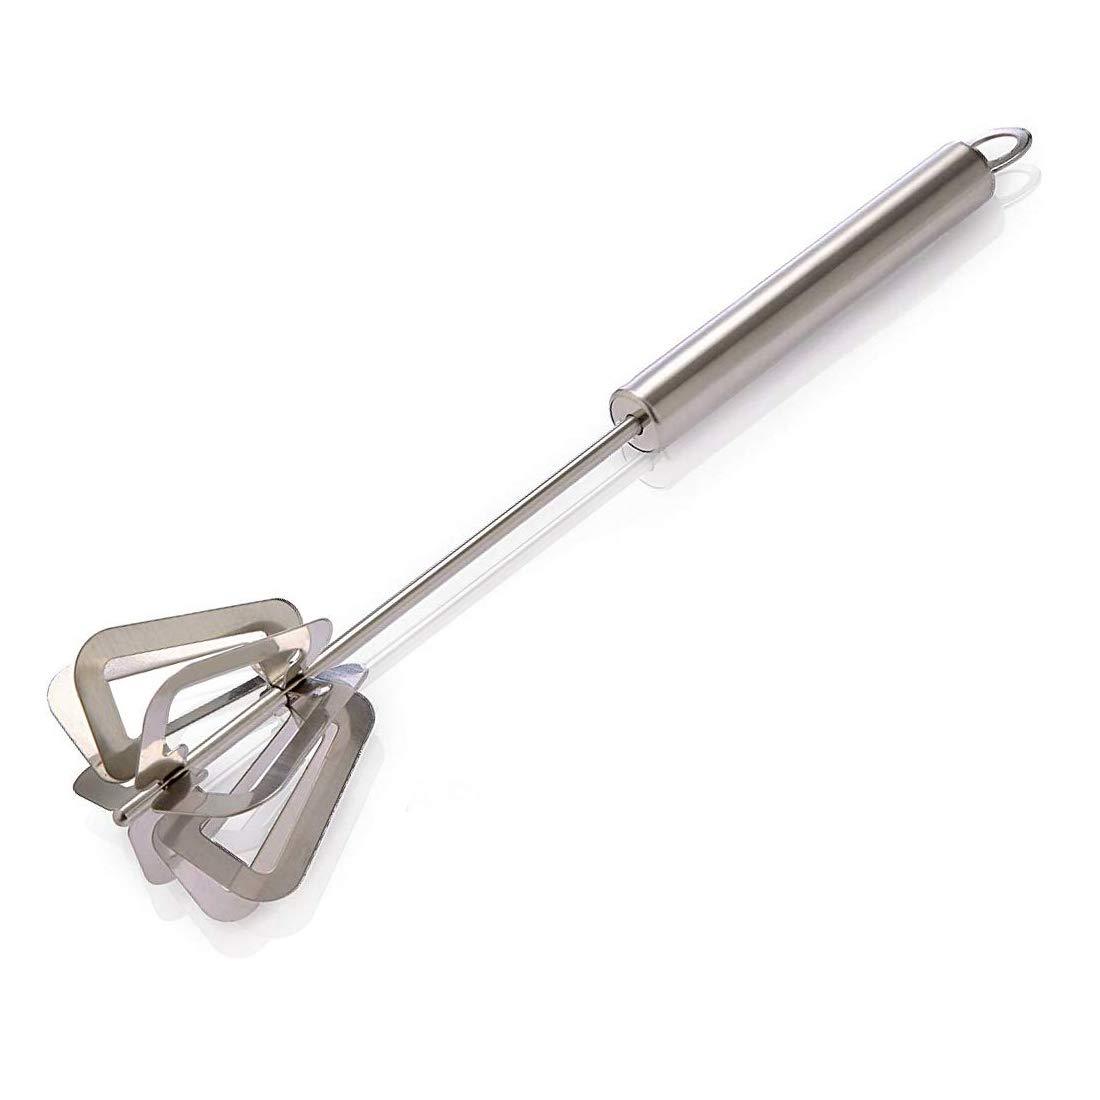 2335 Stainless Steel Manual Mixi, Hand Blender - SkyShopy